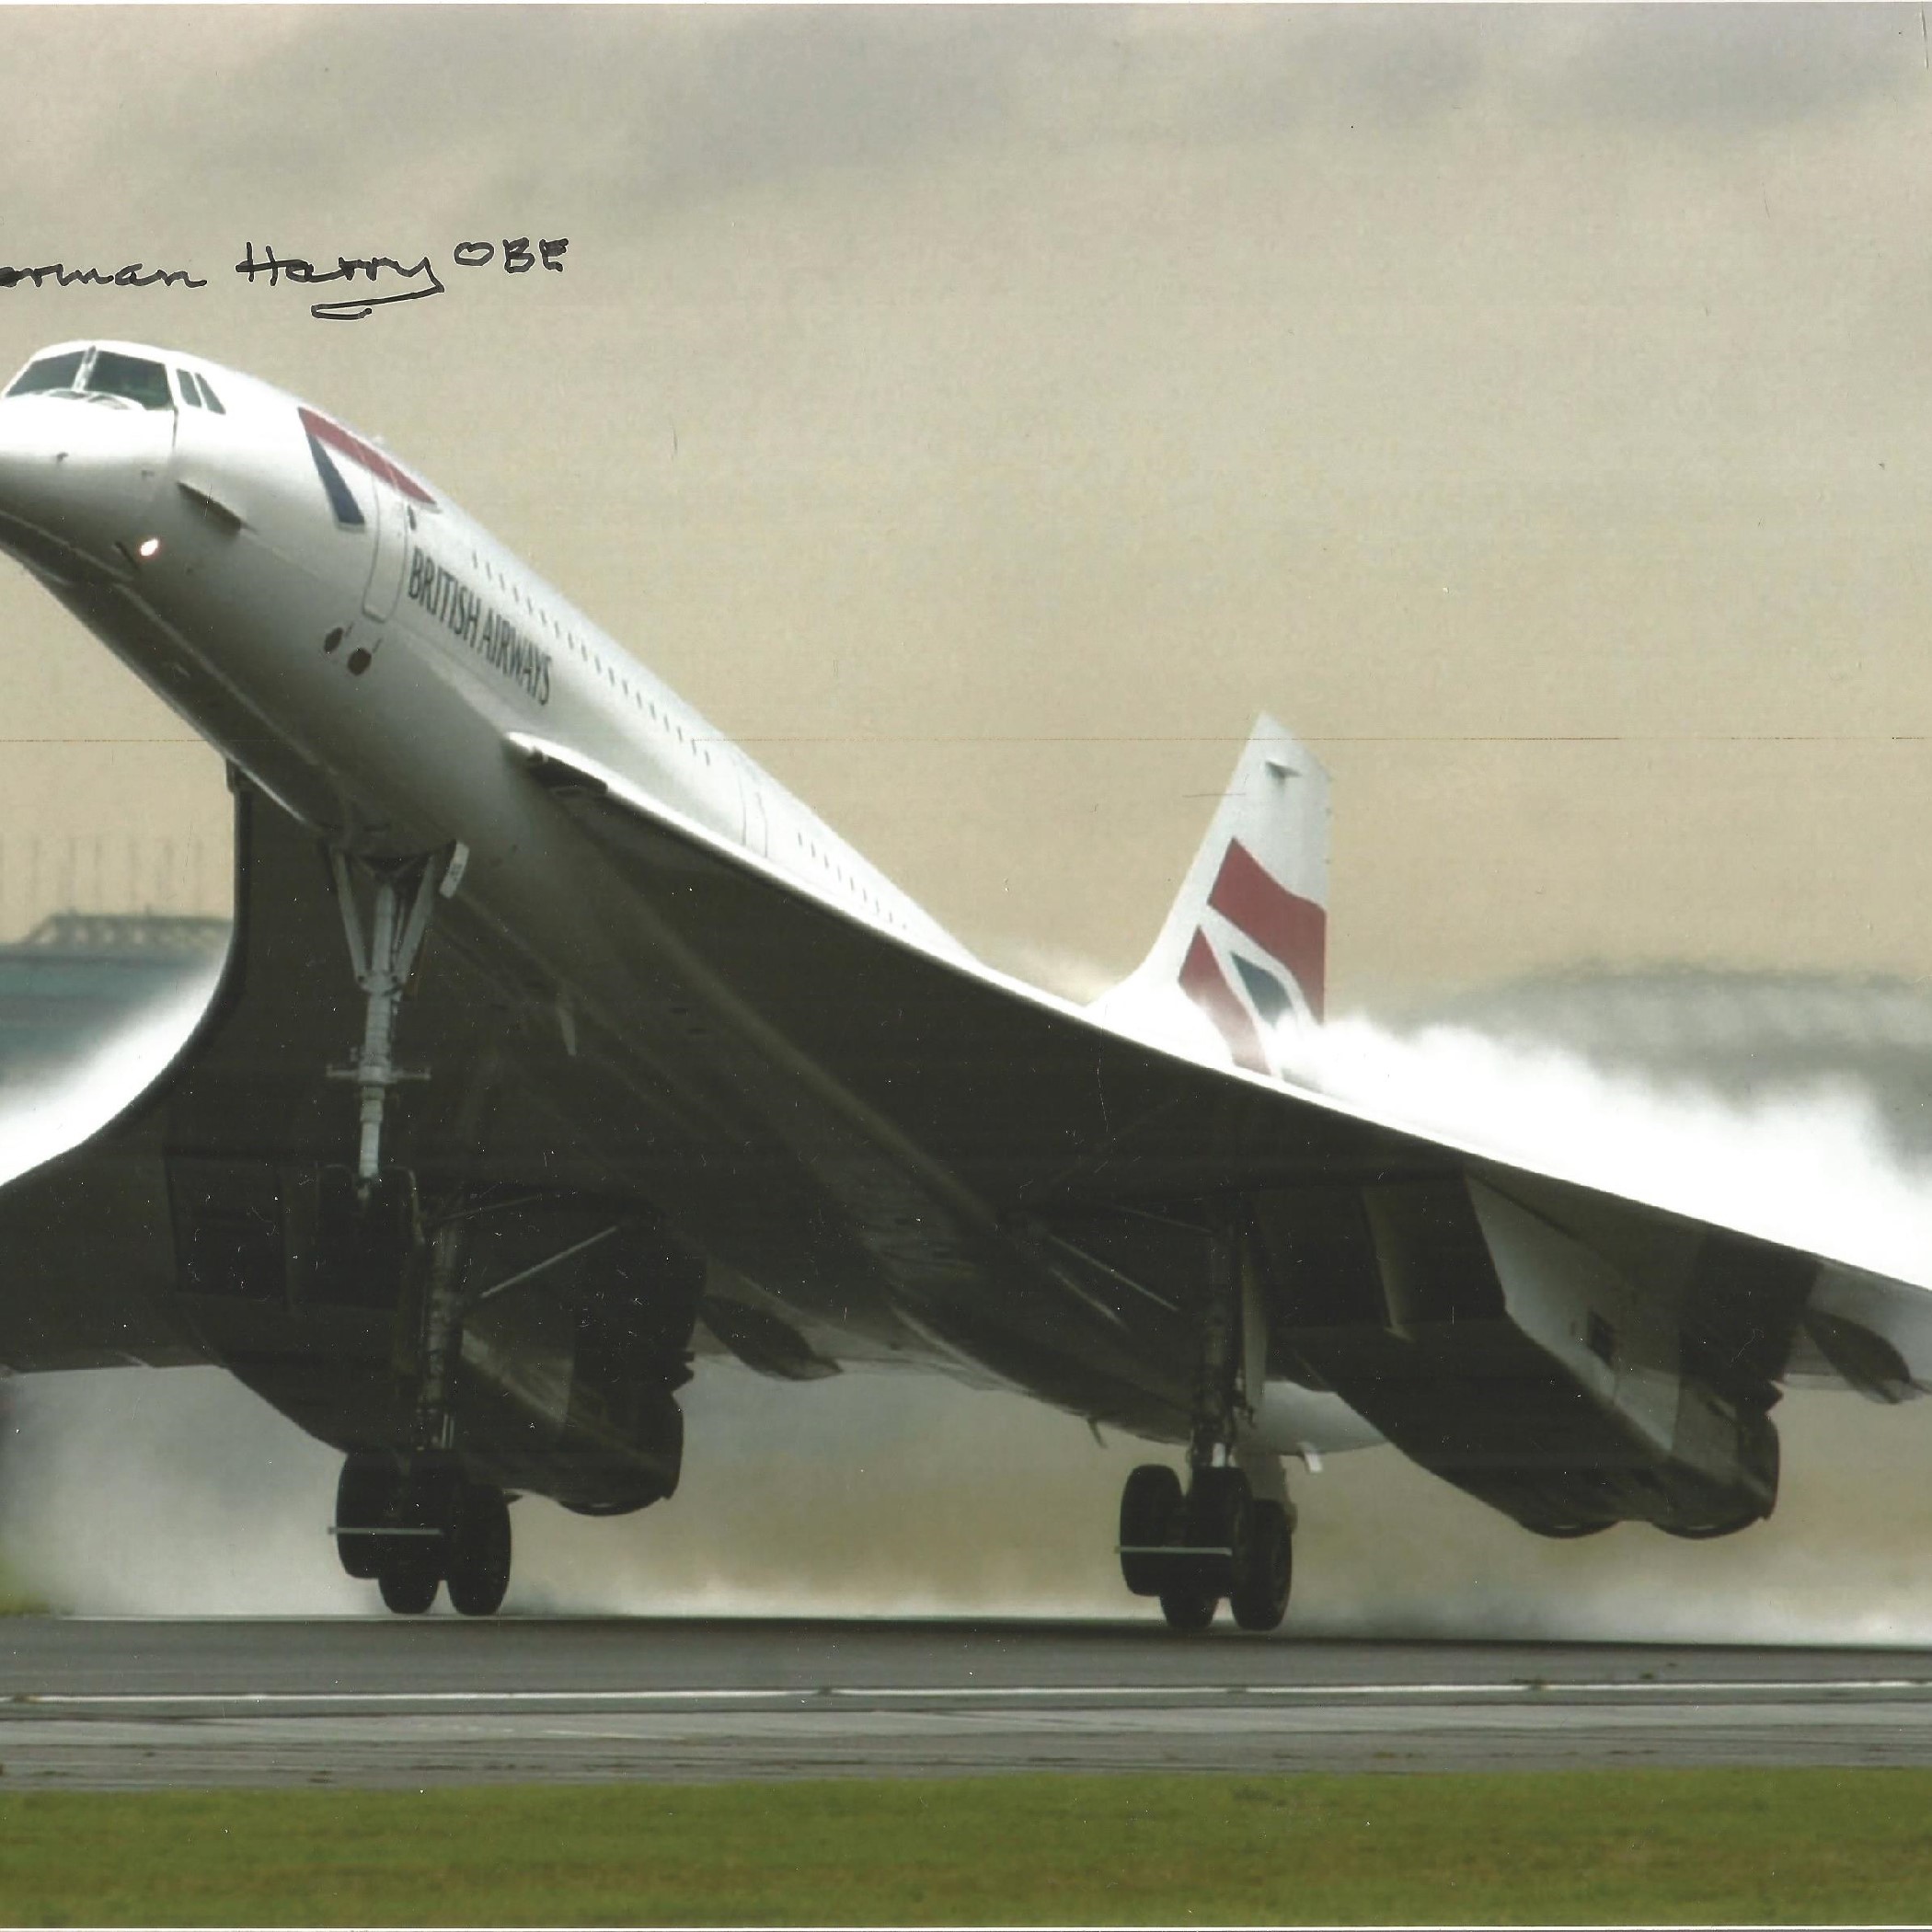 Sir Norman Harry signed 12x8 colour photo. Sir Norman Harry was the designer of the Concorde droop